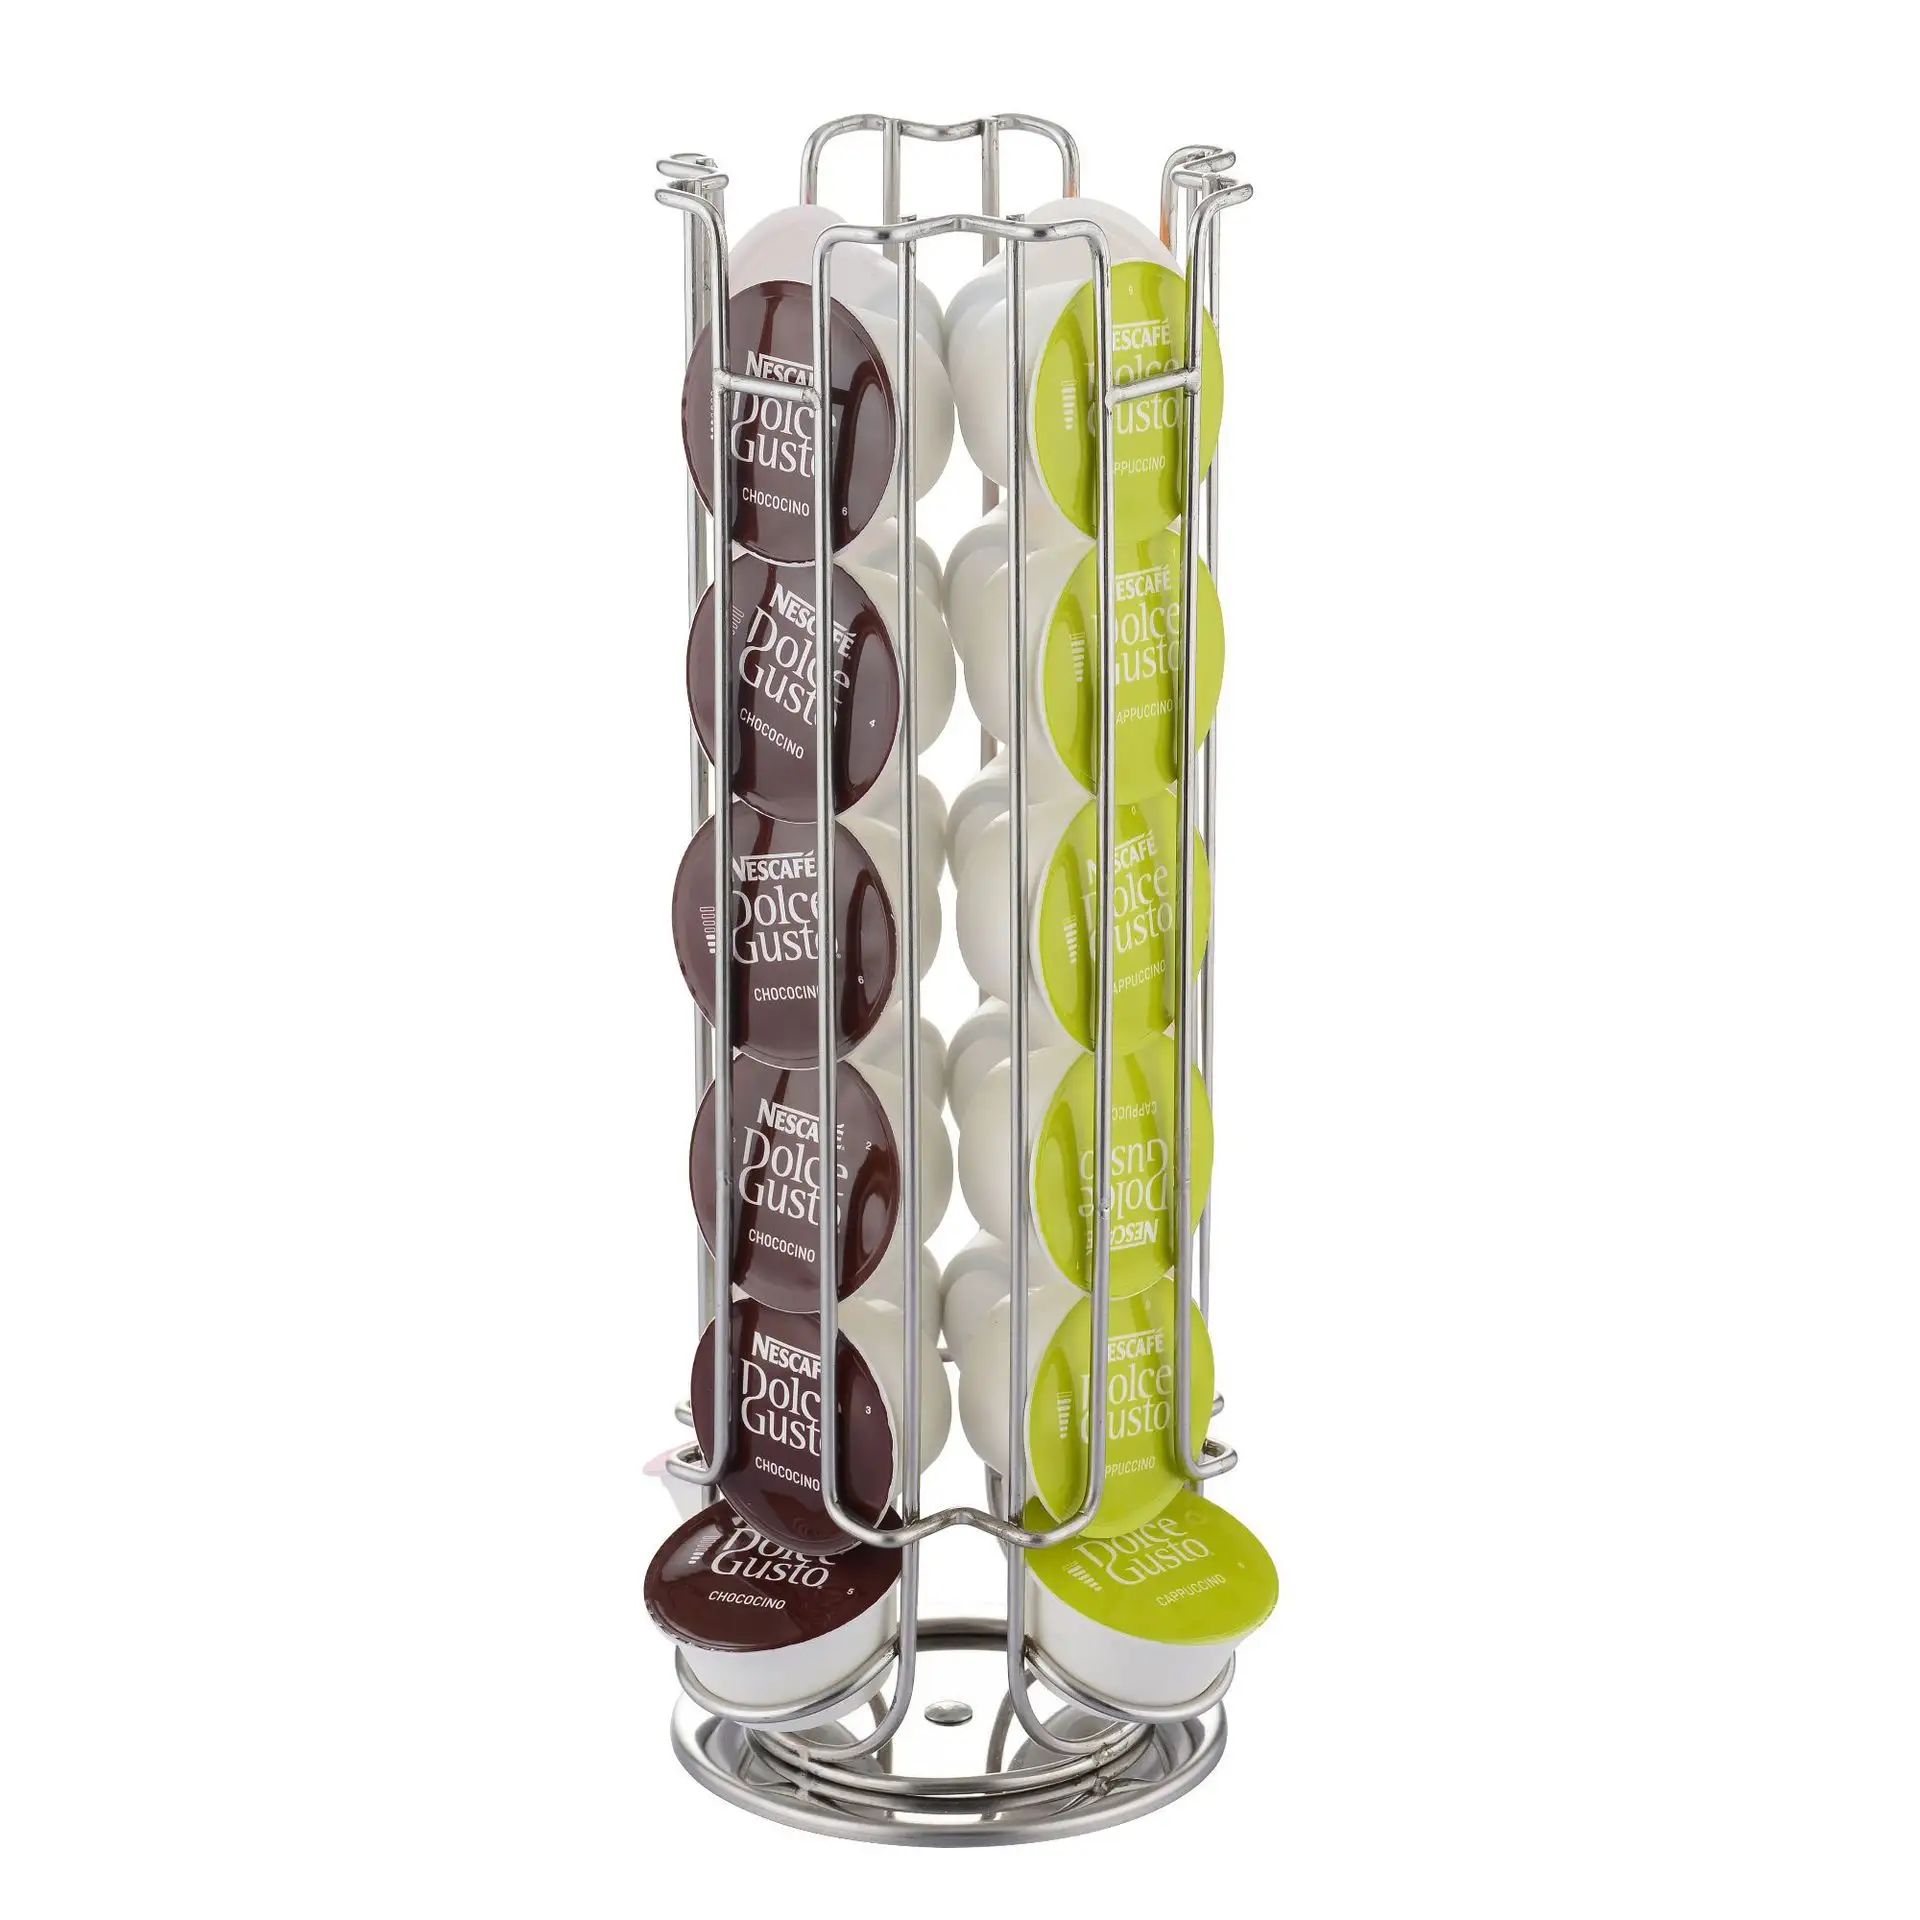 Two-Color Display Rotating Iron Storage Rack for Dolce Gusto Coffee Capsules Office & Household Coffee Pod Storage Rack